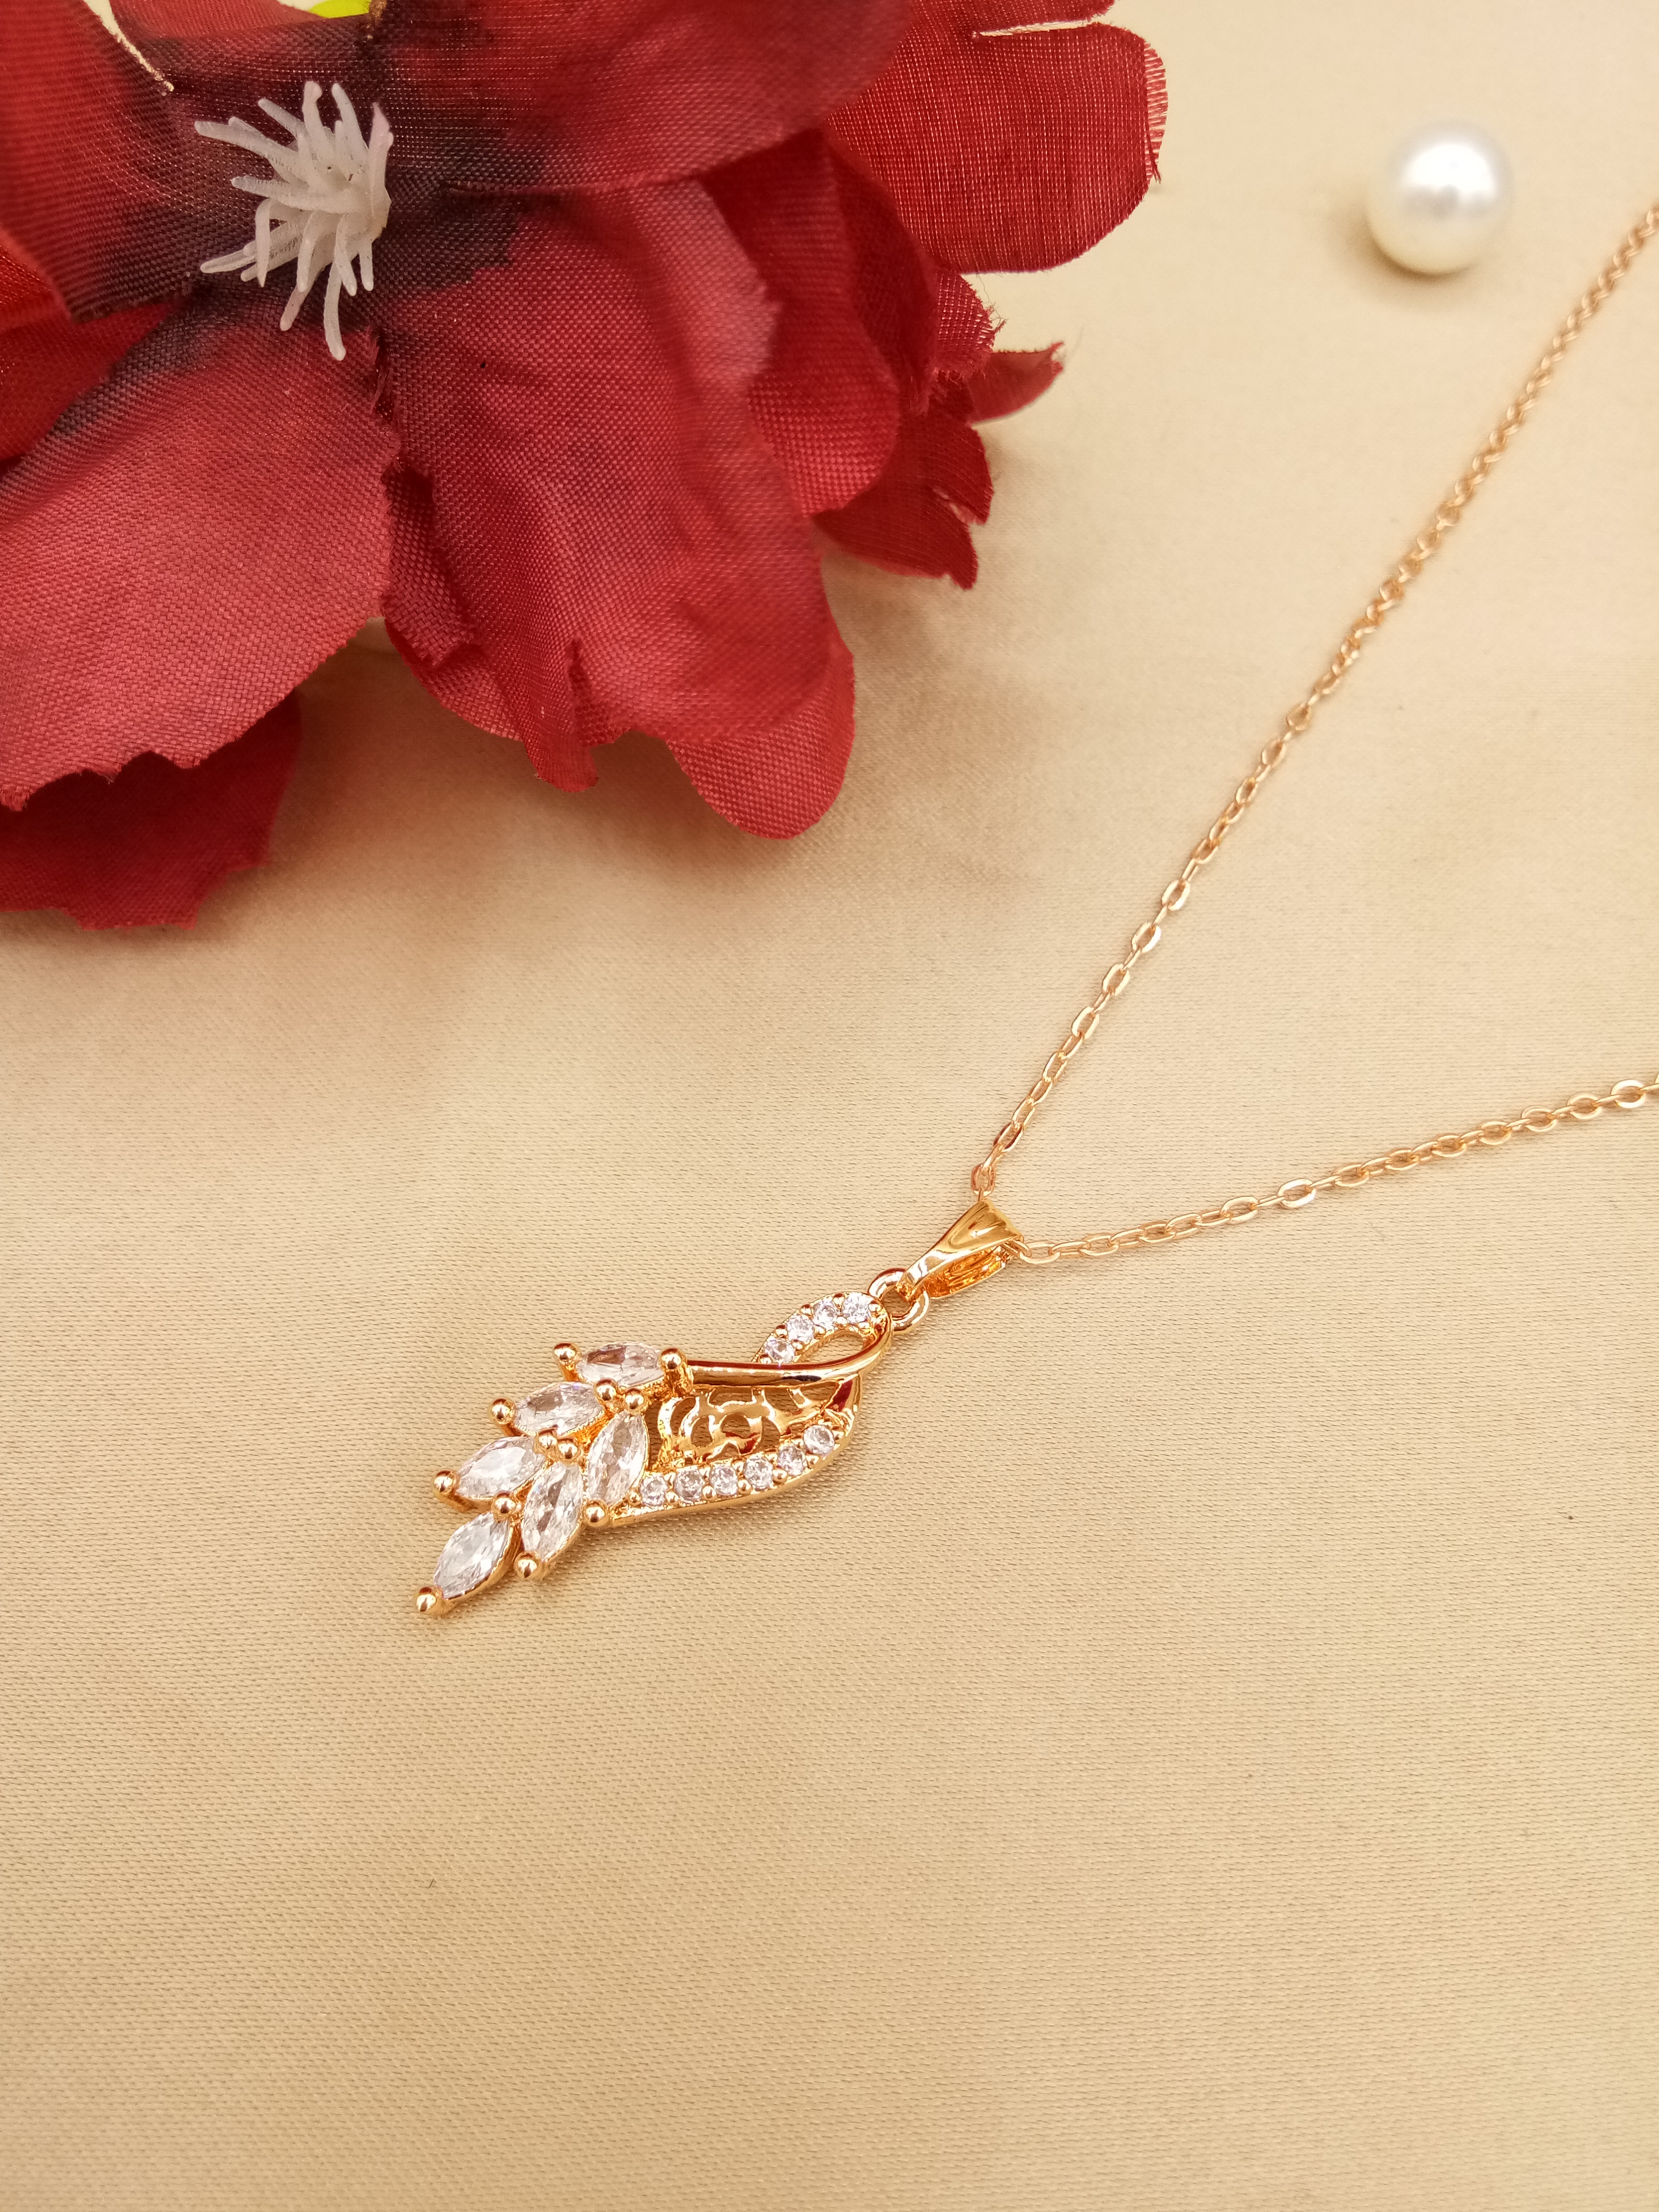 AD ROSE PENDENT - 07170 NX